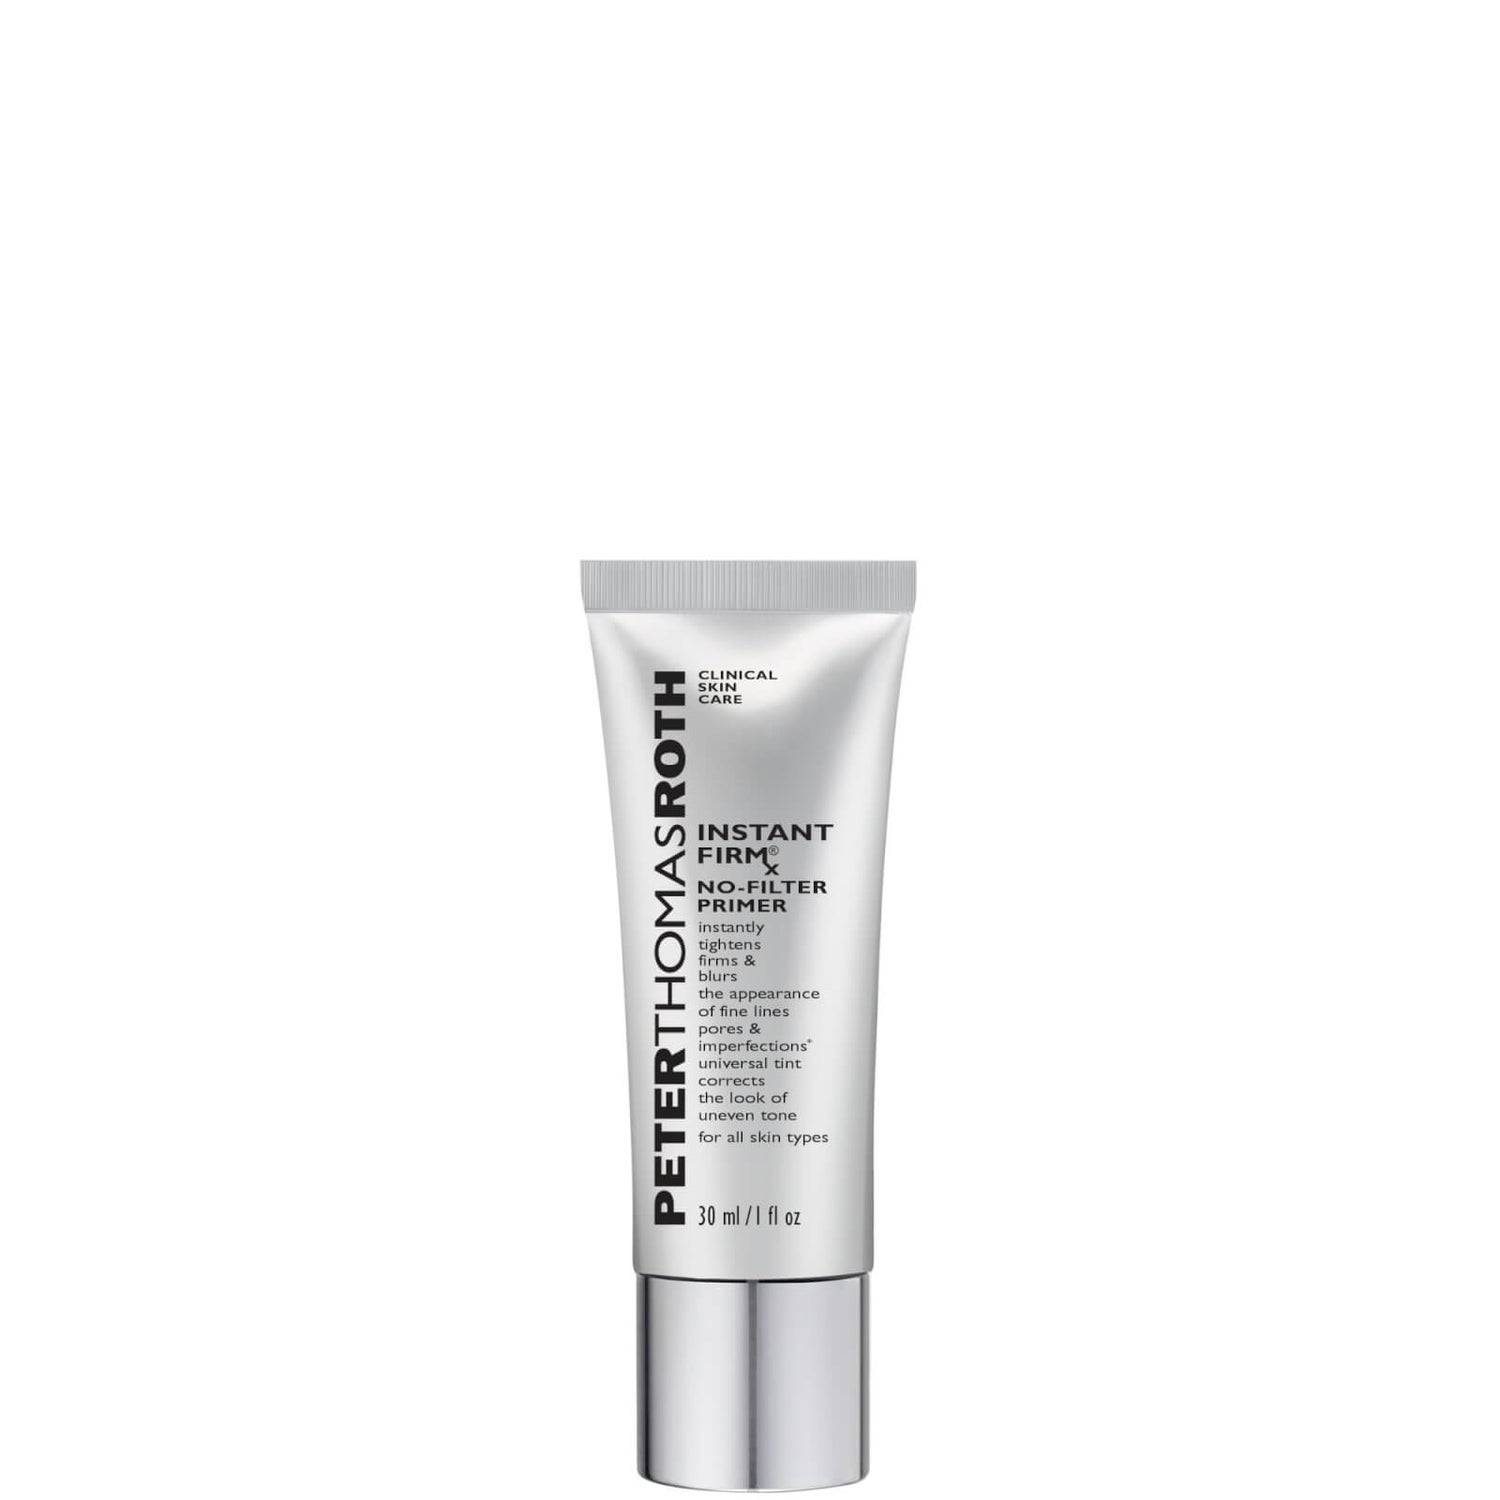 Peter Thomas Roth Instant FIRMx No Filter Primer 30ml